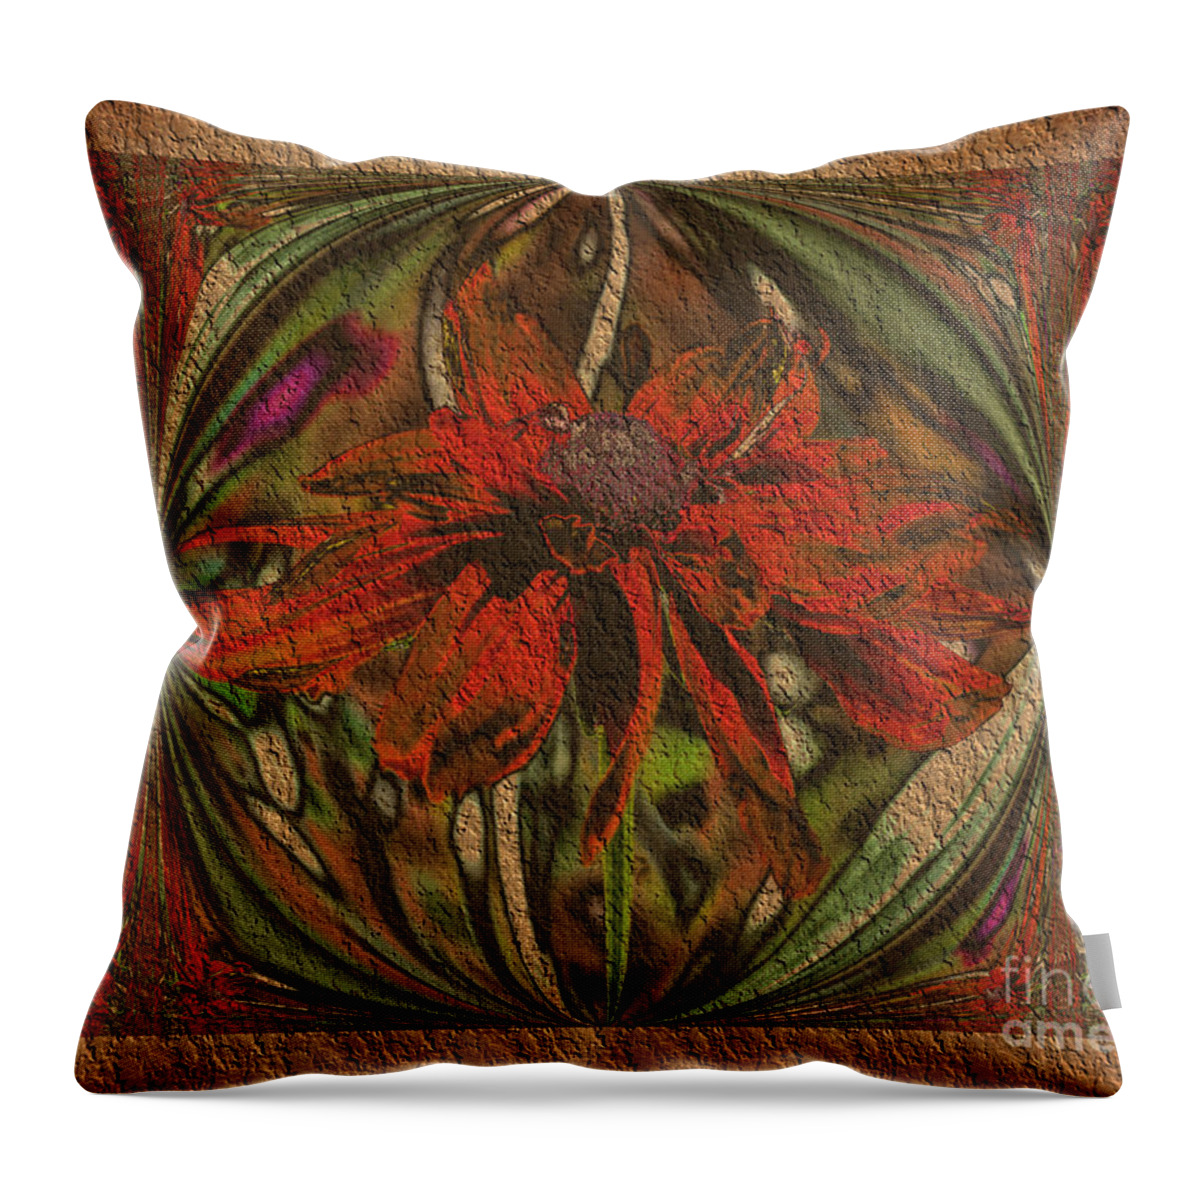 Abstract Throw Pillow featuring the digital art Abstract Flower by Smilin Eyes Treasures